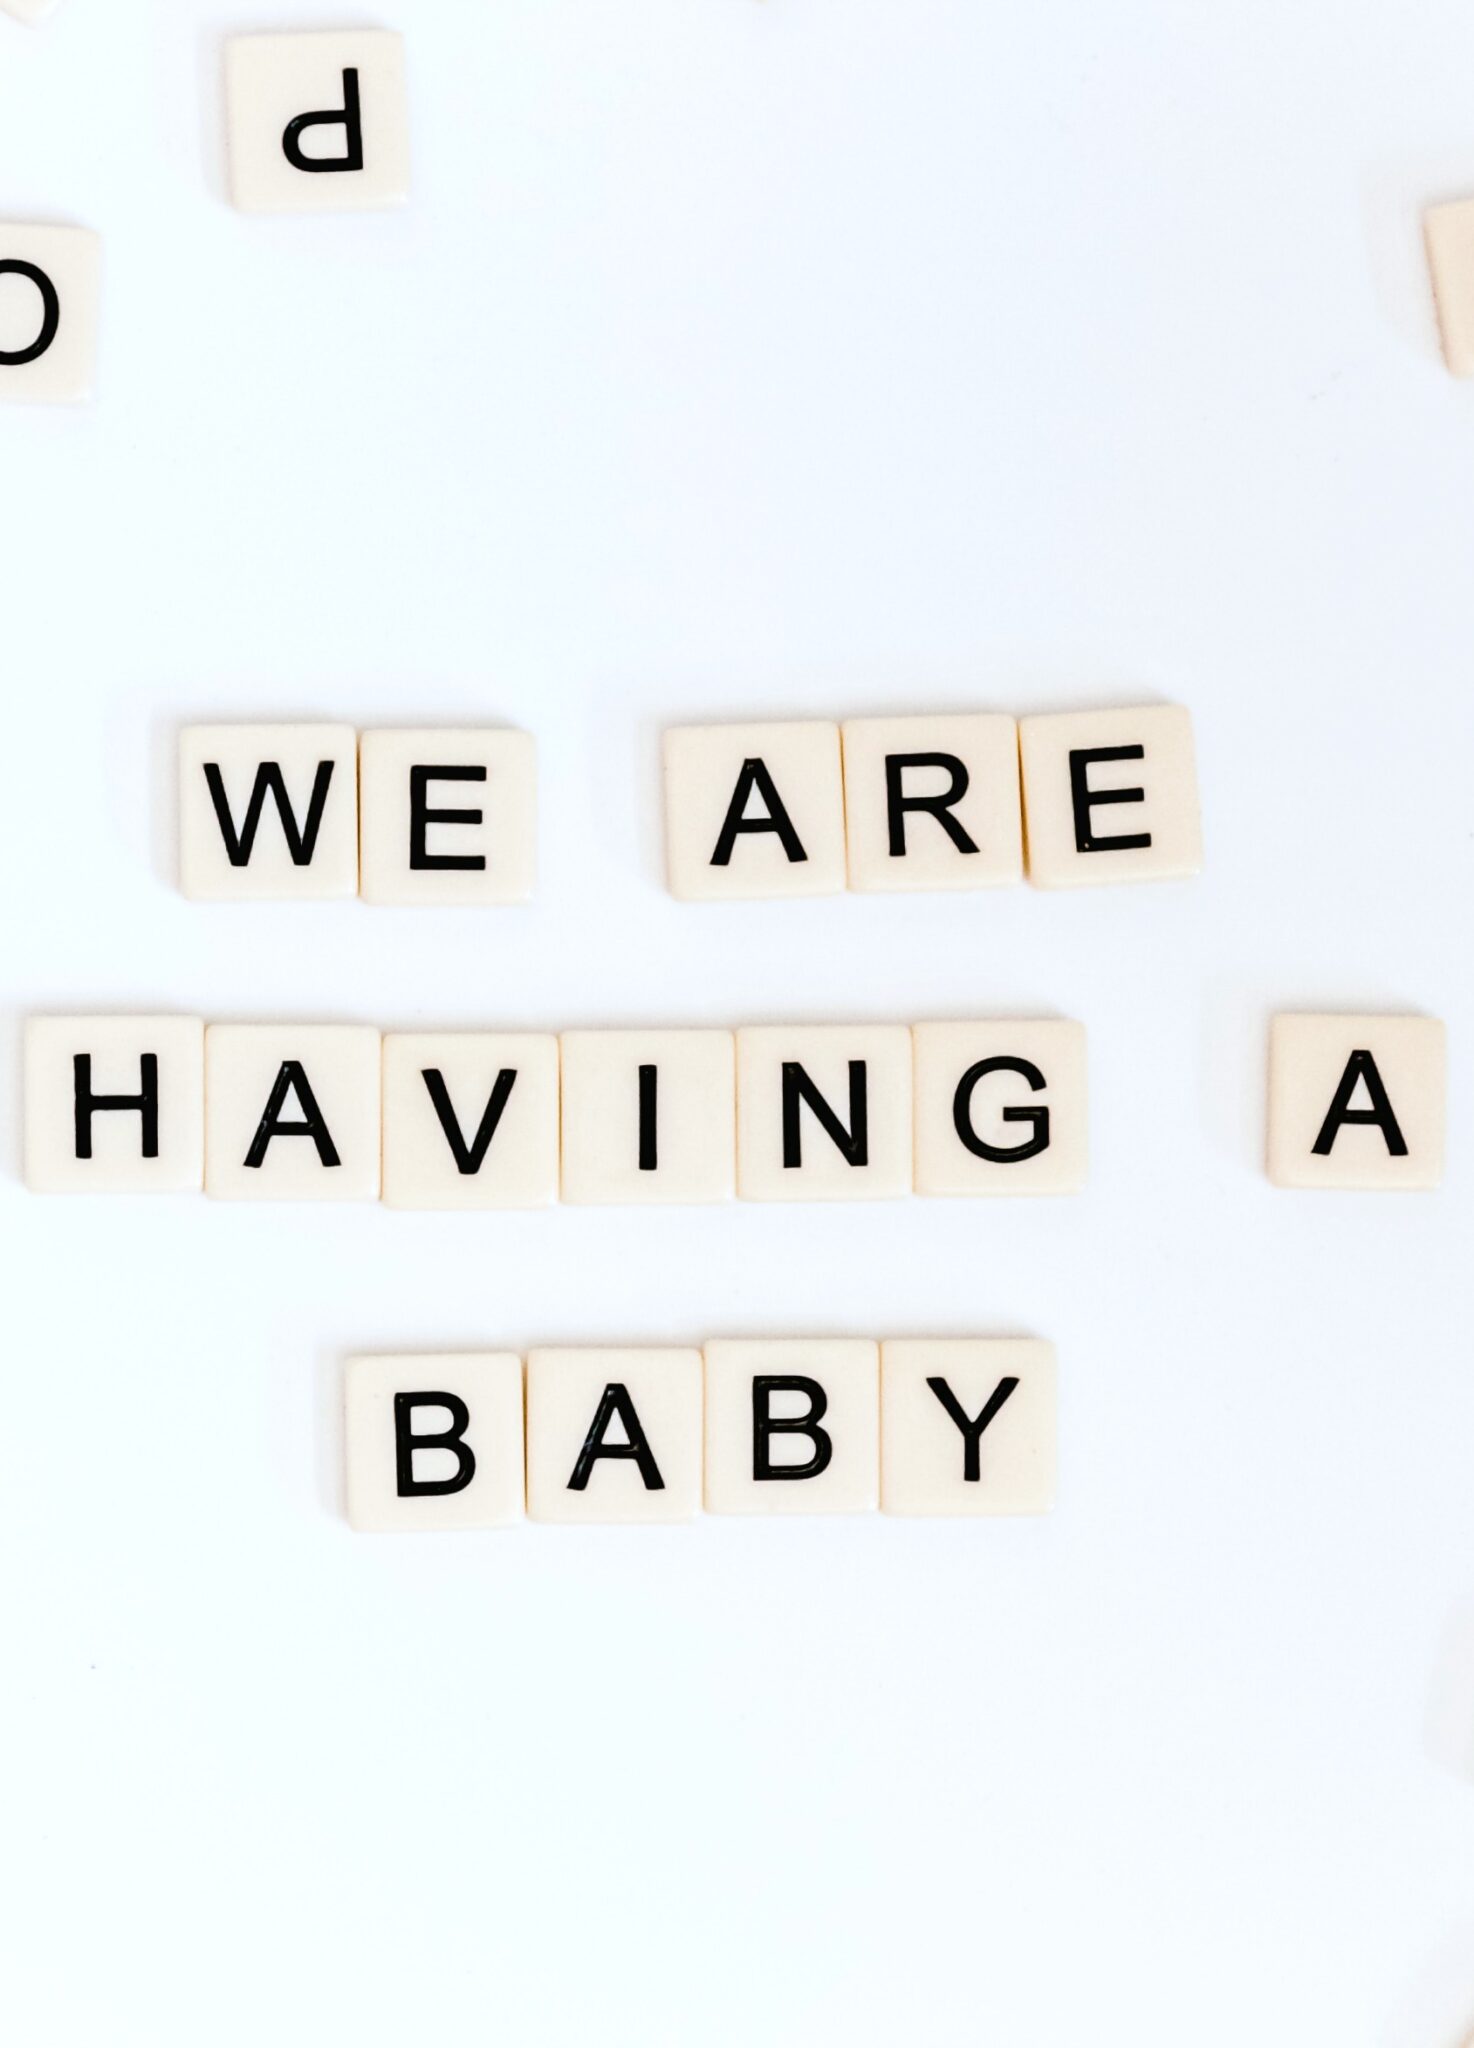 6 Baby Shower Gift Ideas on a Budget